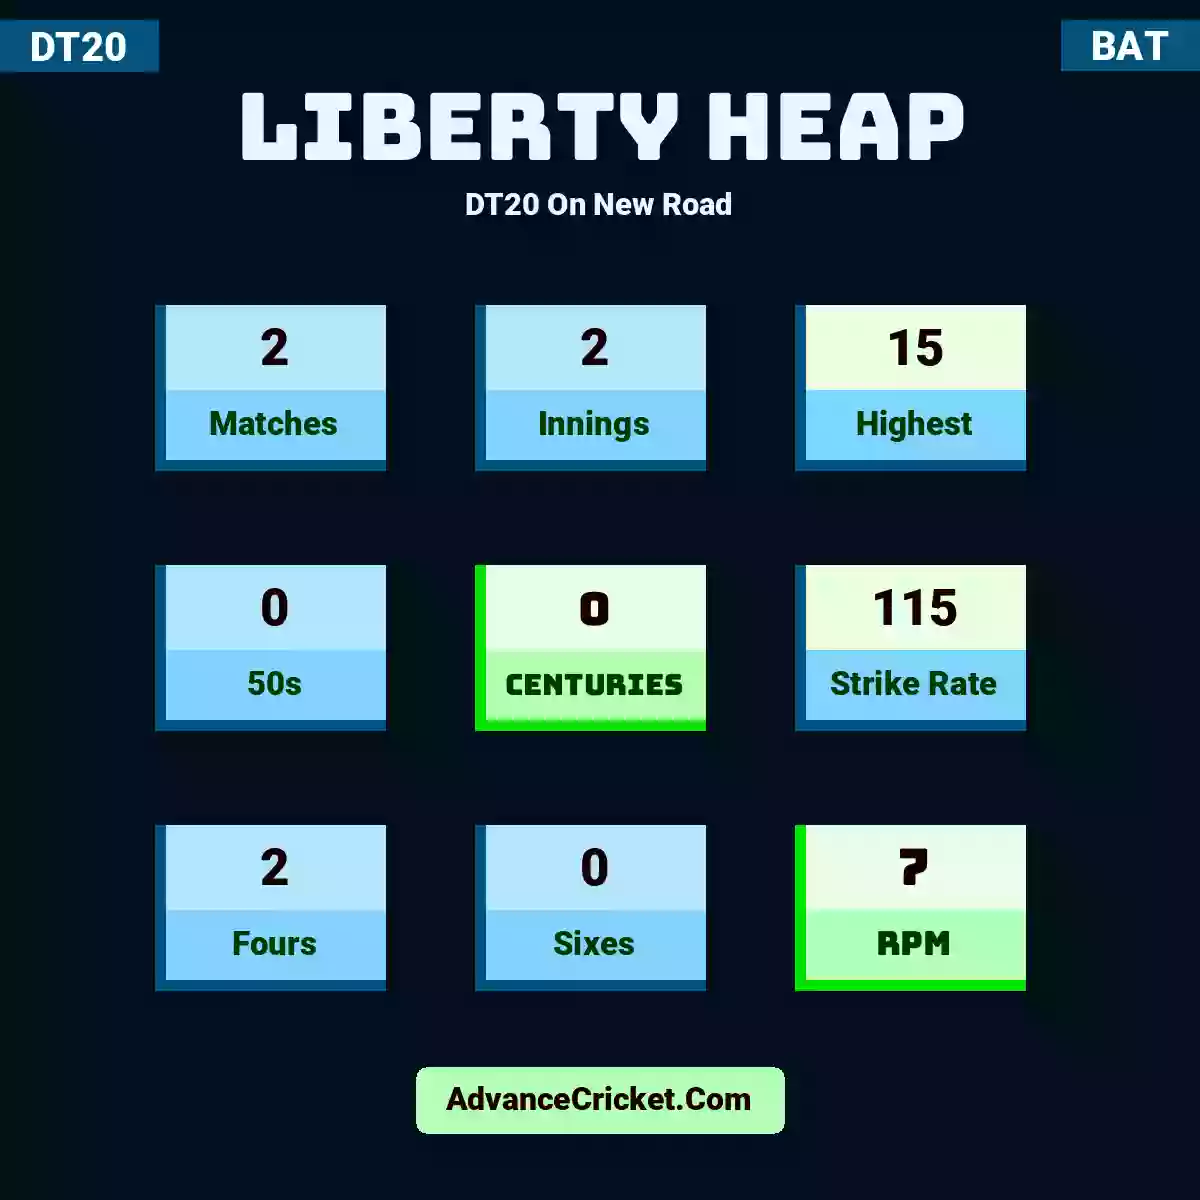 Liberty Heap DT20  On New Road, Liberty Heap played 2 matches, scored 15 runs as highest, 0 half-centuries, and 0 centuries, with a strike rate of 115. L.Heap hit 2 fours and 0 sixes, with an RPM of 7.